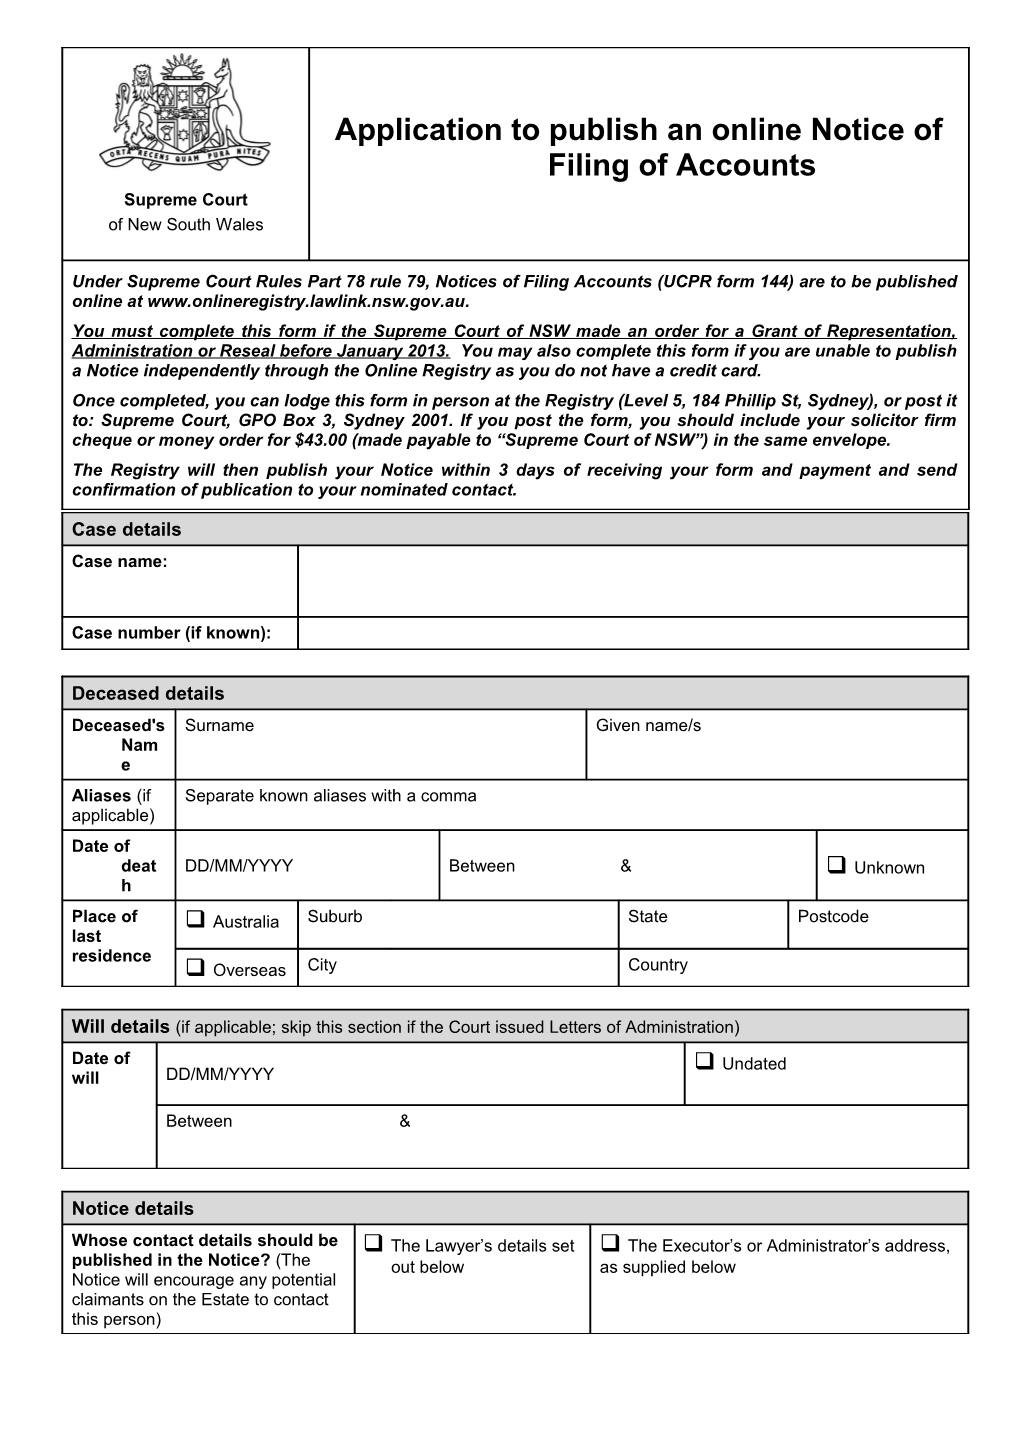 Application to Publish an Online Notice of Filing of Accounts